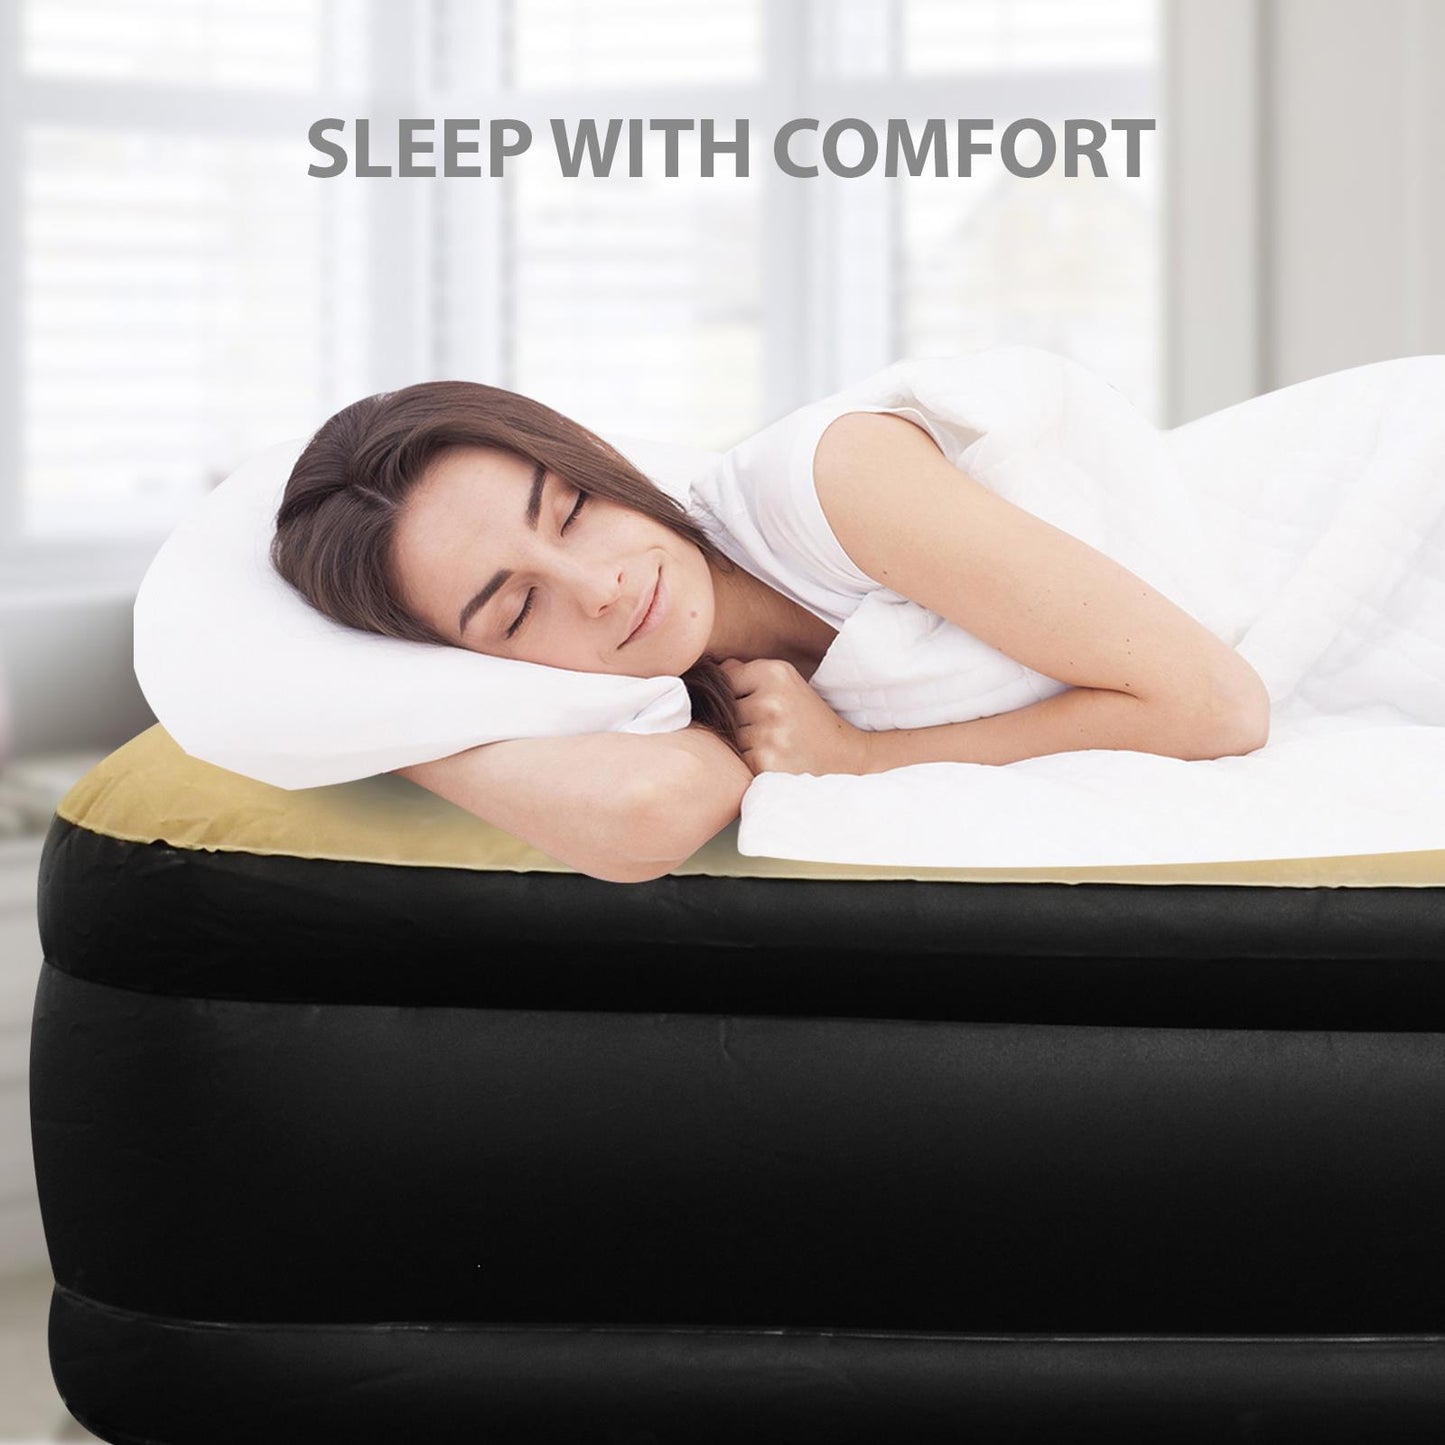 Sleep Comfortably with Flocked Inflatable Air Bed